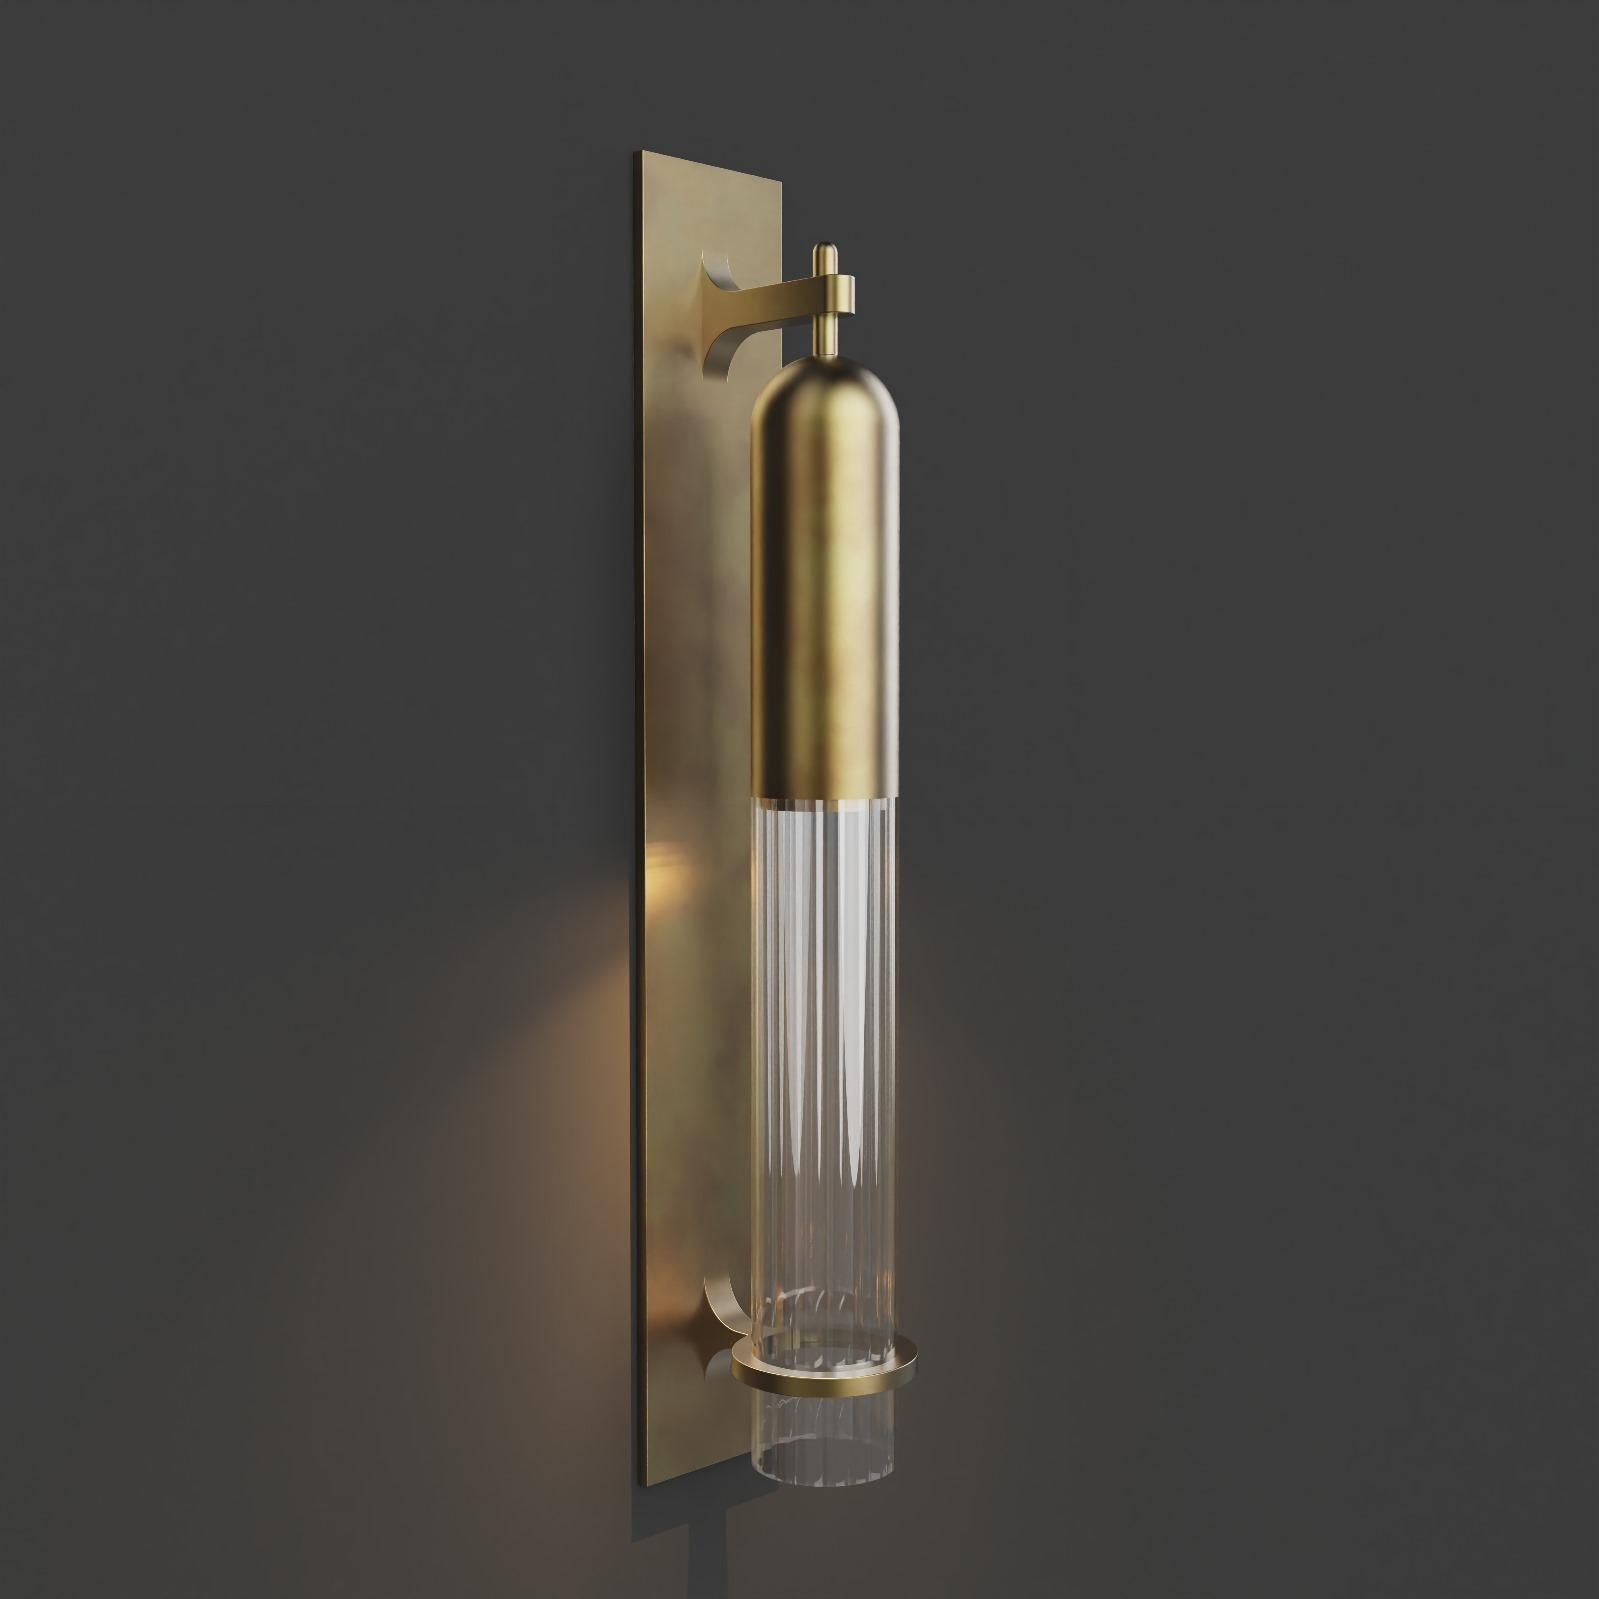 Wall Light in  brushed brass metal finish with fluted glass shade. 

Dimensions:
Overall Height: 550mm 
Glass Dia: 60mm 
Overall projection: 108mm 
Backplate Width: 80m
Integrated LED

Made to order to buyer's specification. Variations to dimensions